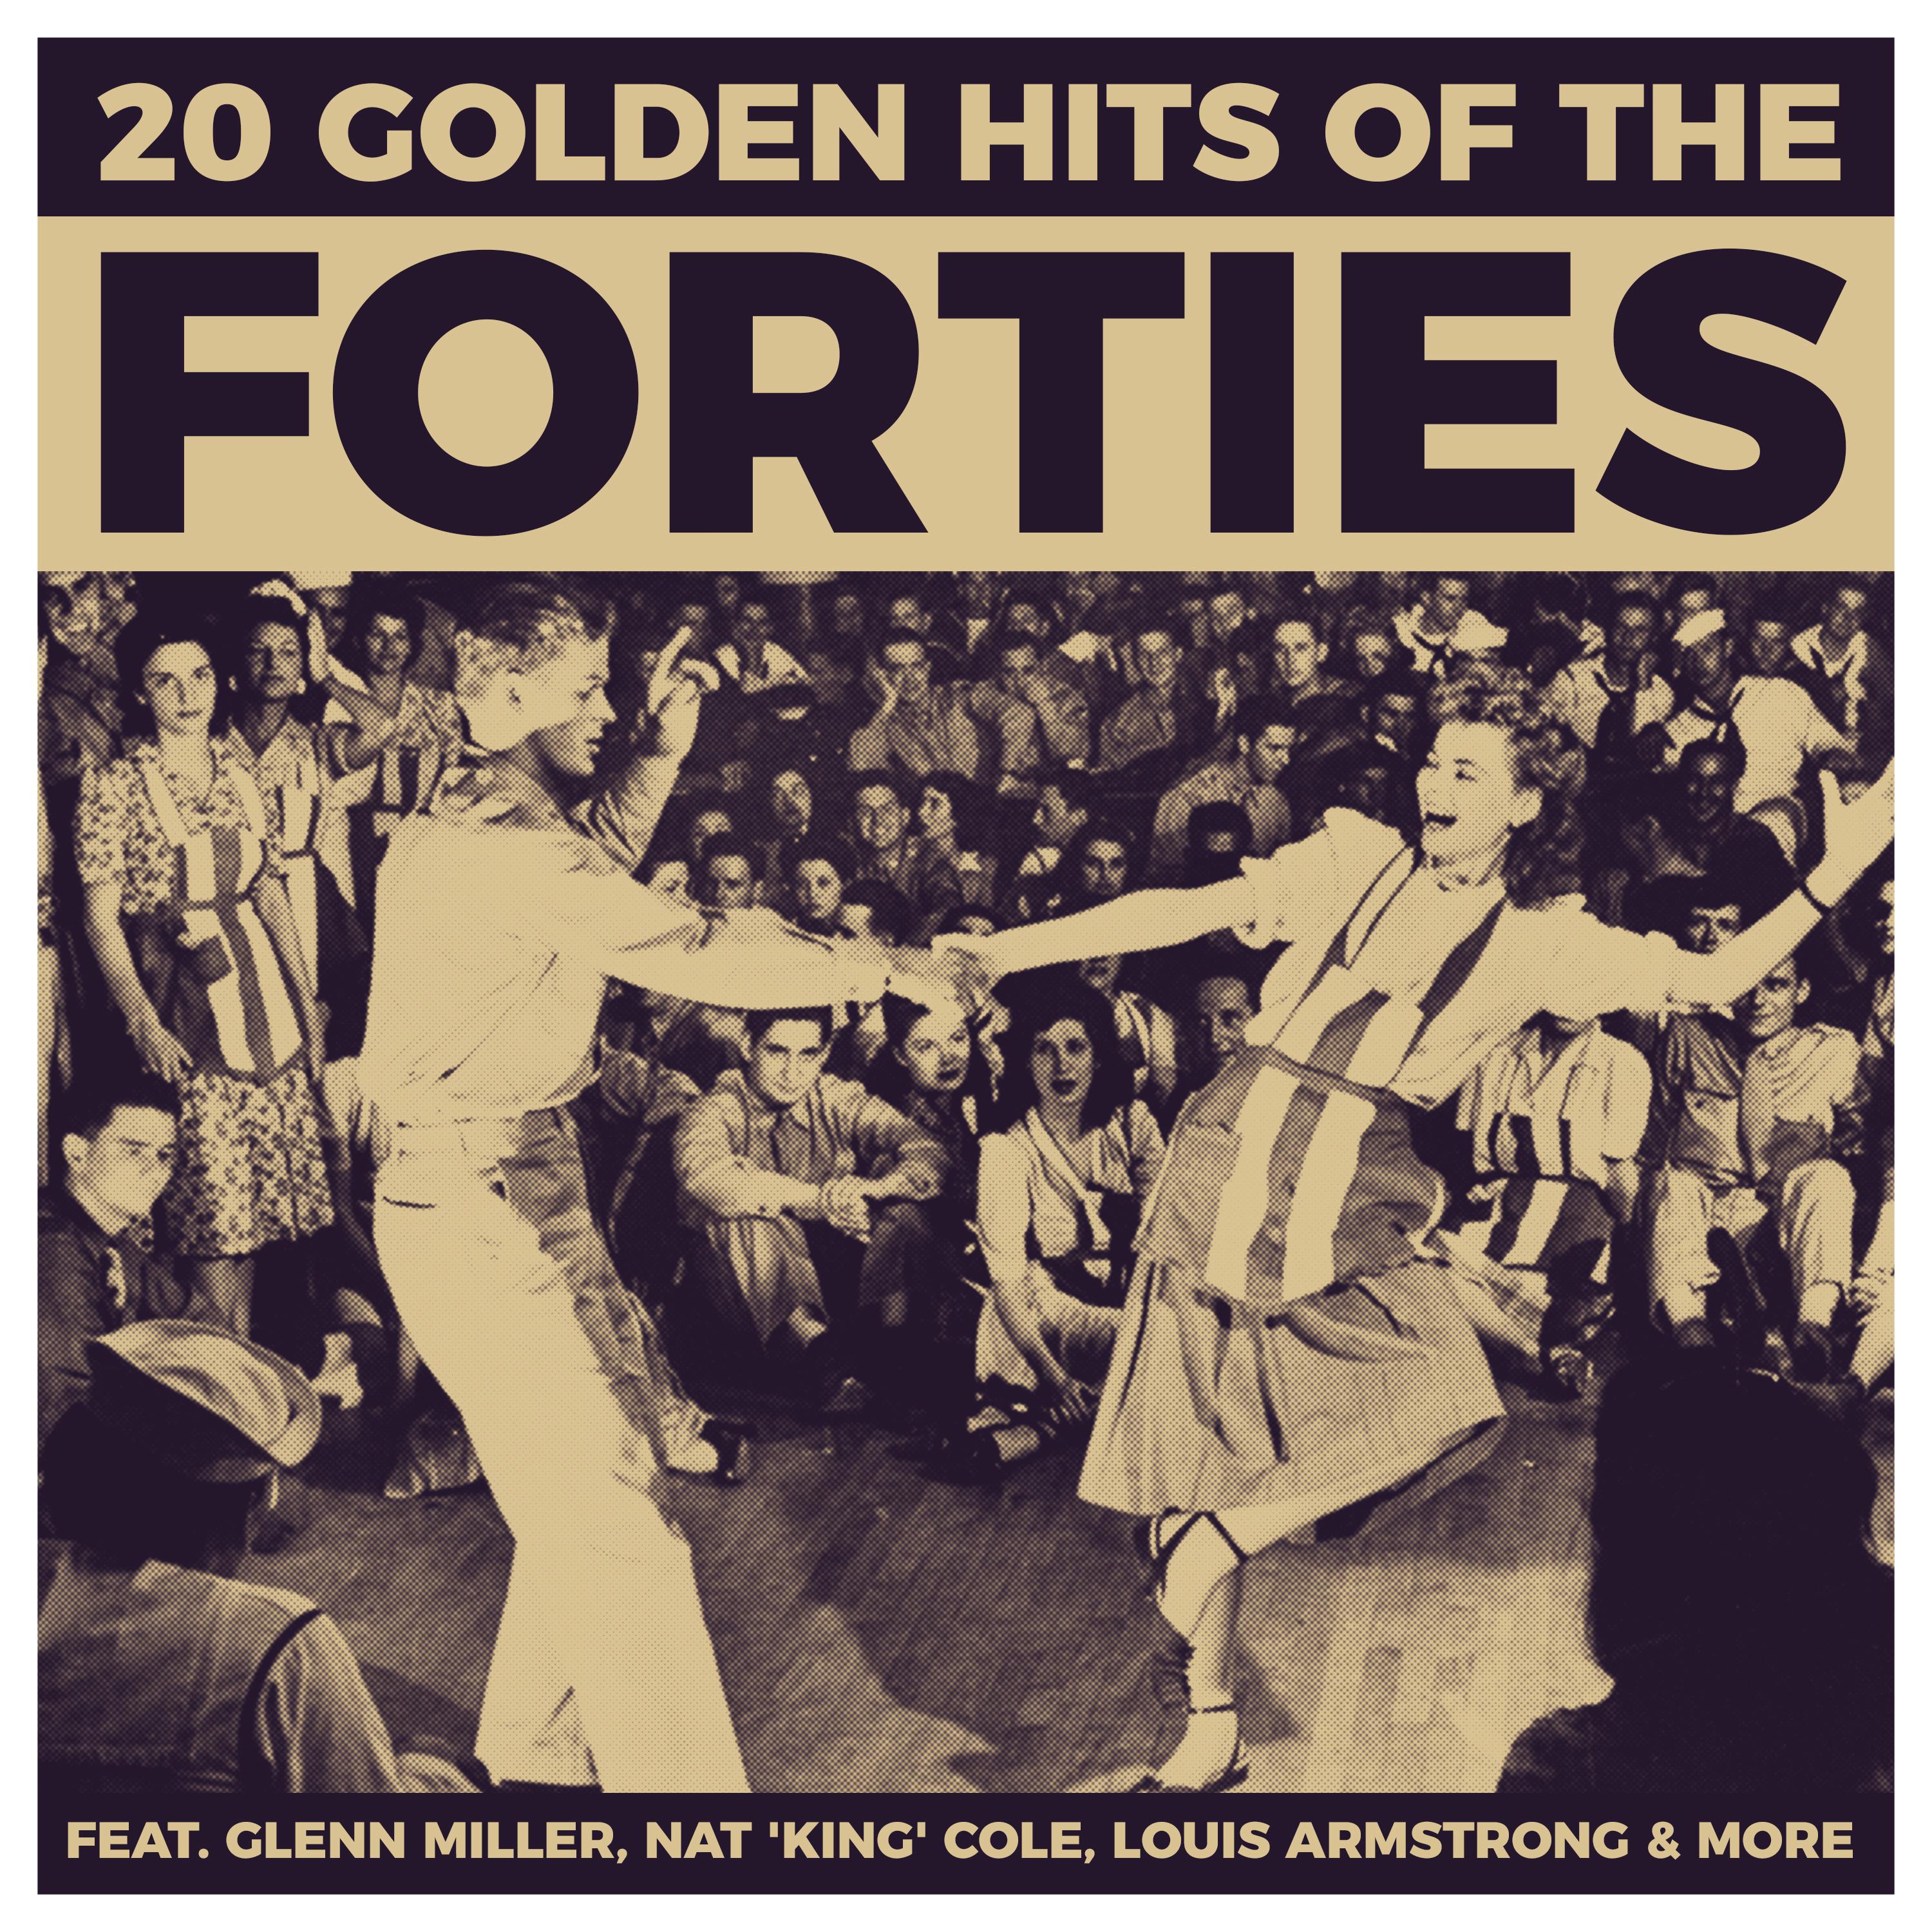 20 Golden Hits Of The Forties